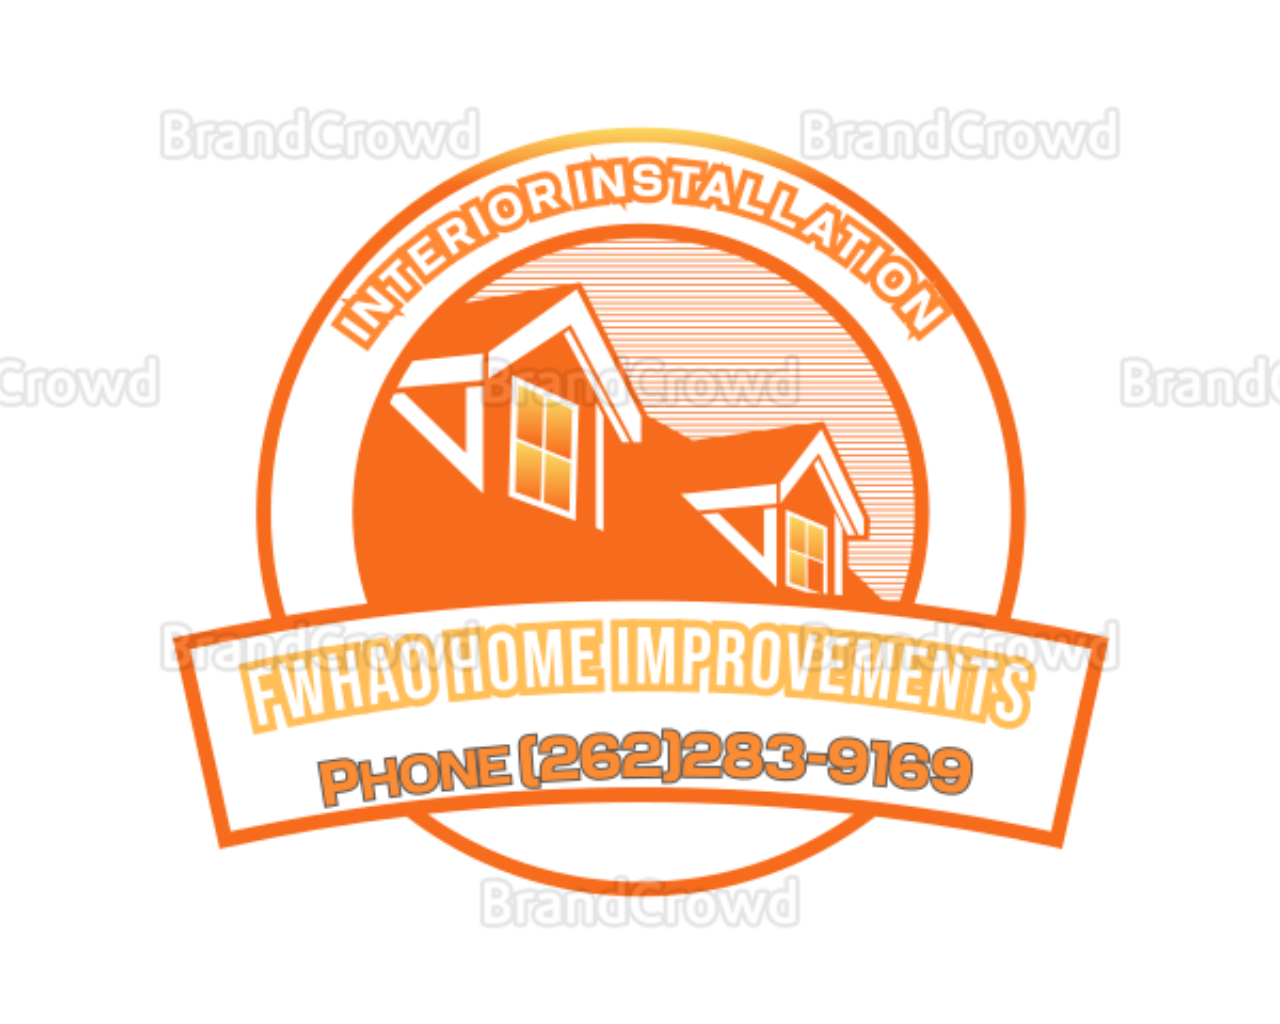 Fwhao home improvements 's web page